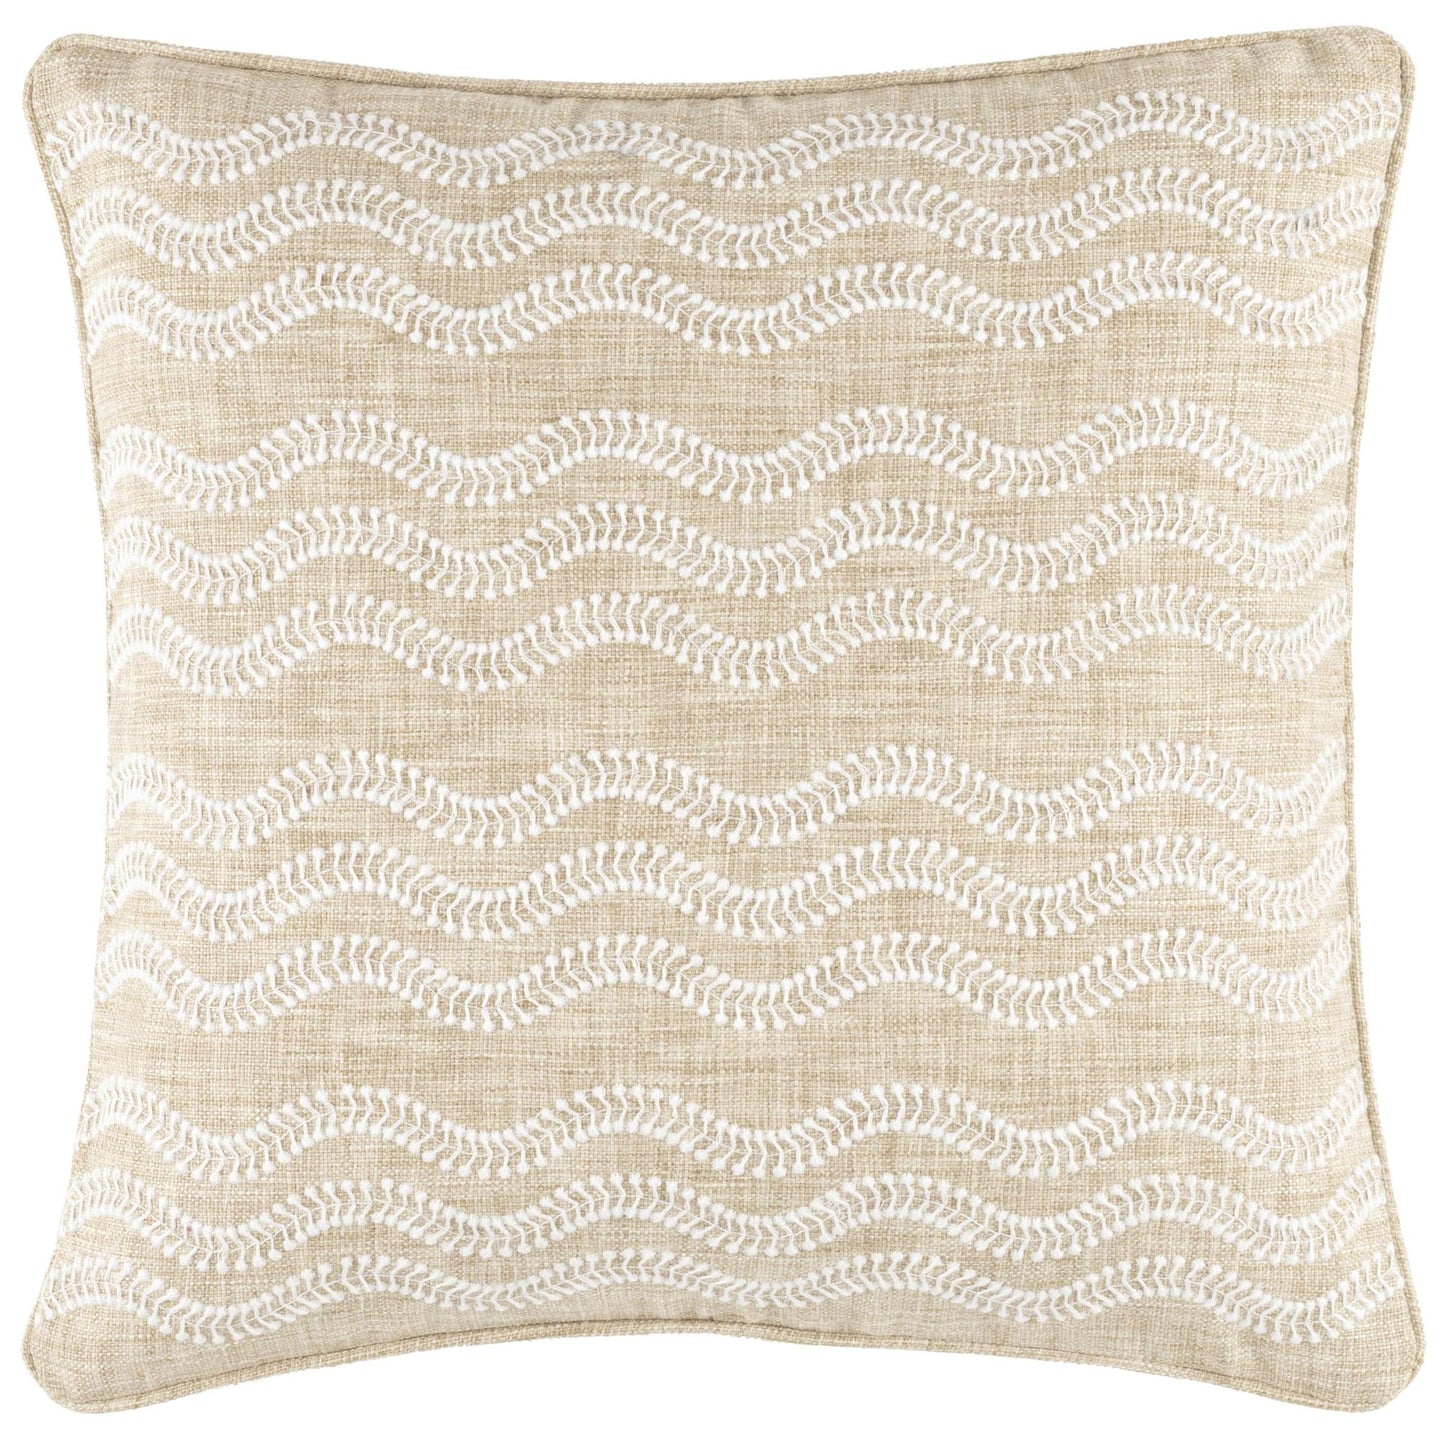 Pillow - "Scout" Embroidered Natural - Indoor/Outdoor - 20"